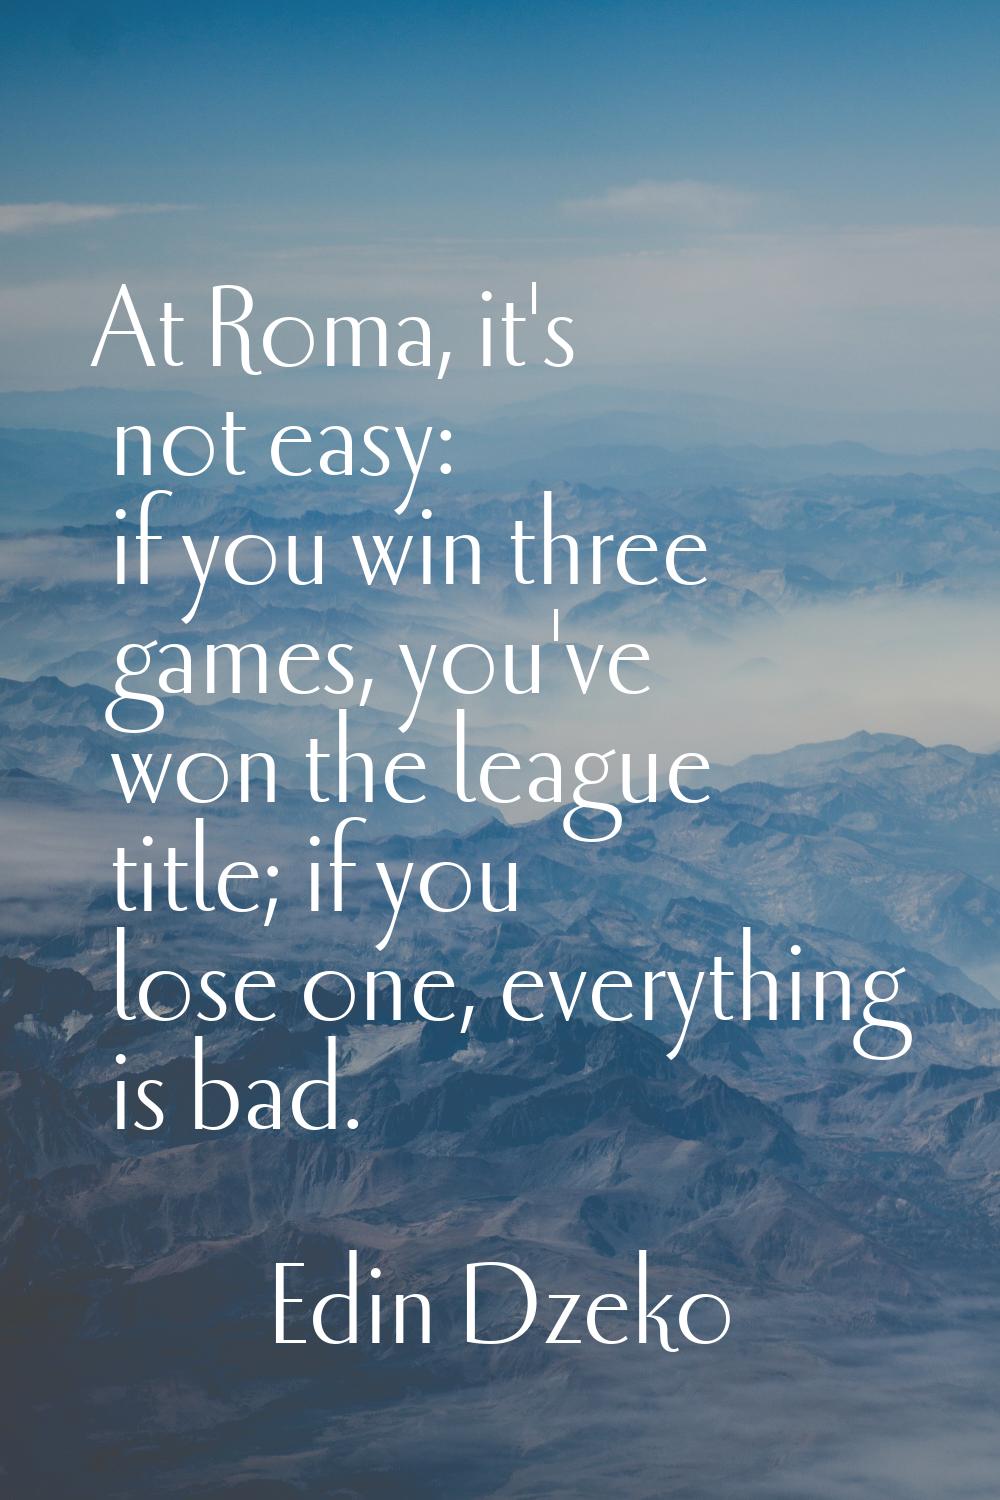 At Roma, it's not easy: if you win three games, you've won the league title; if you lose one, every